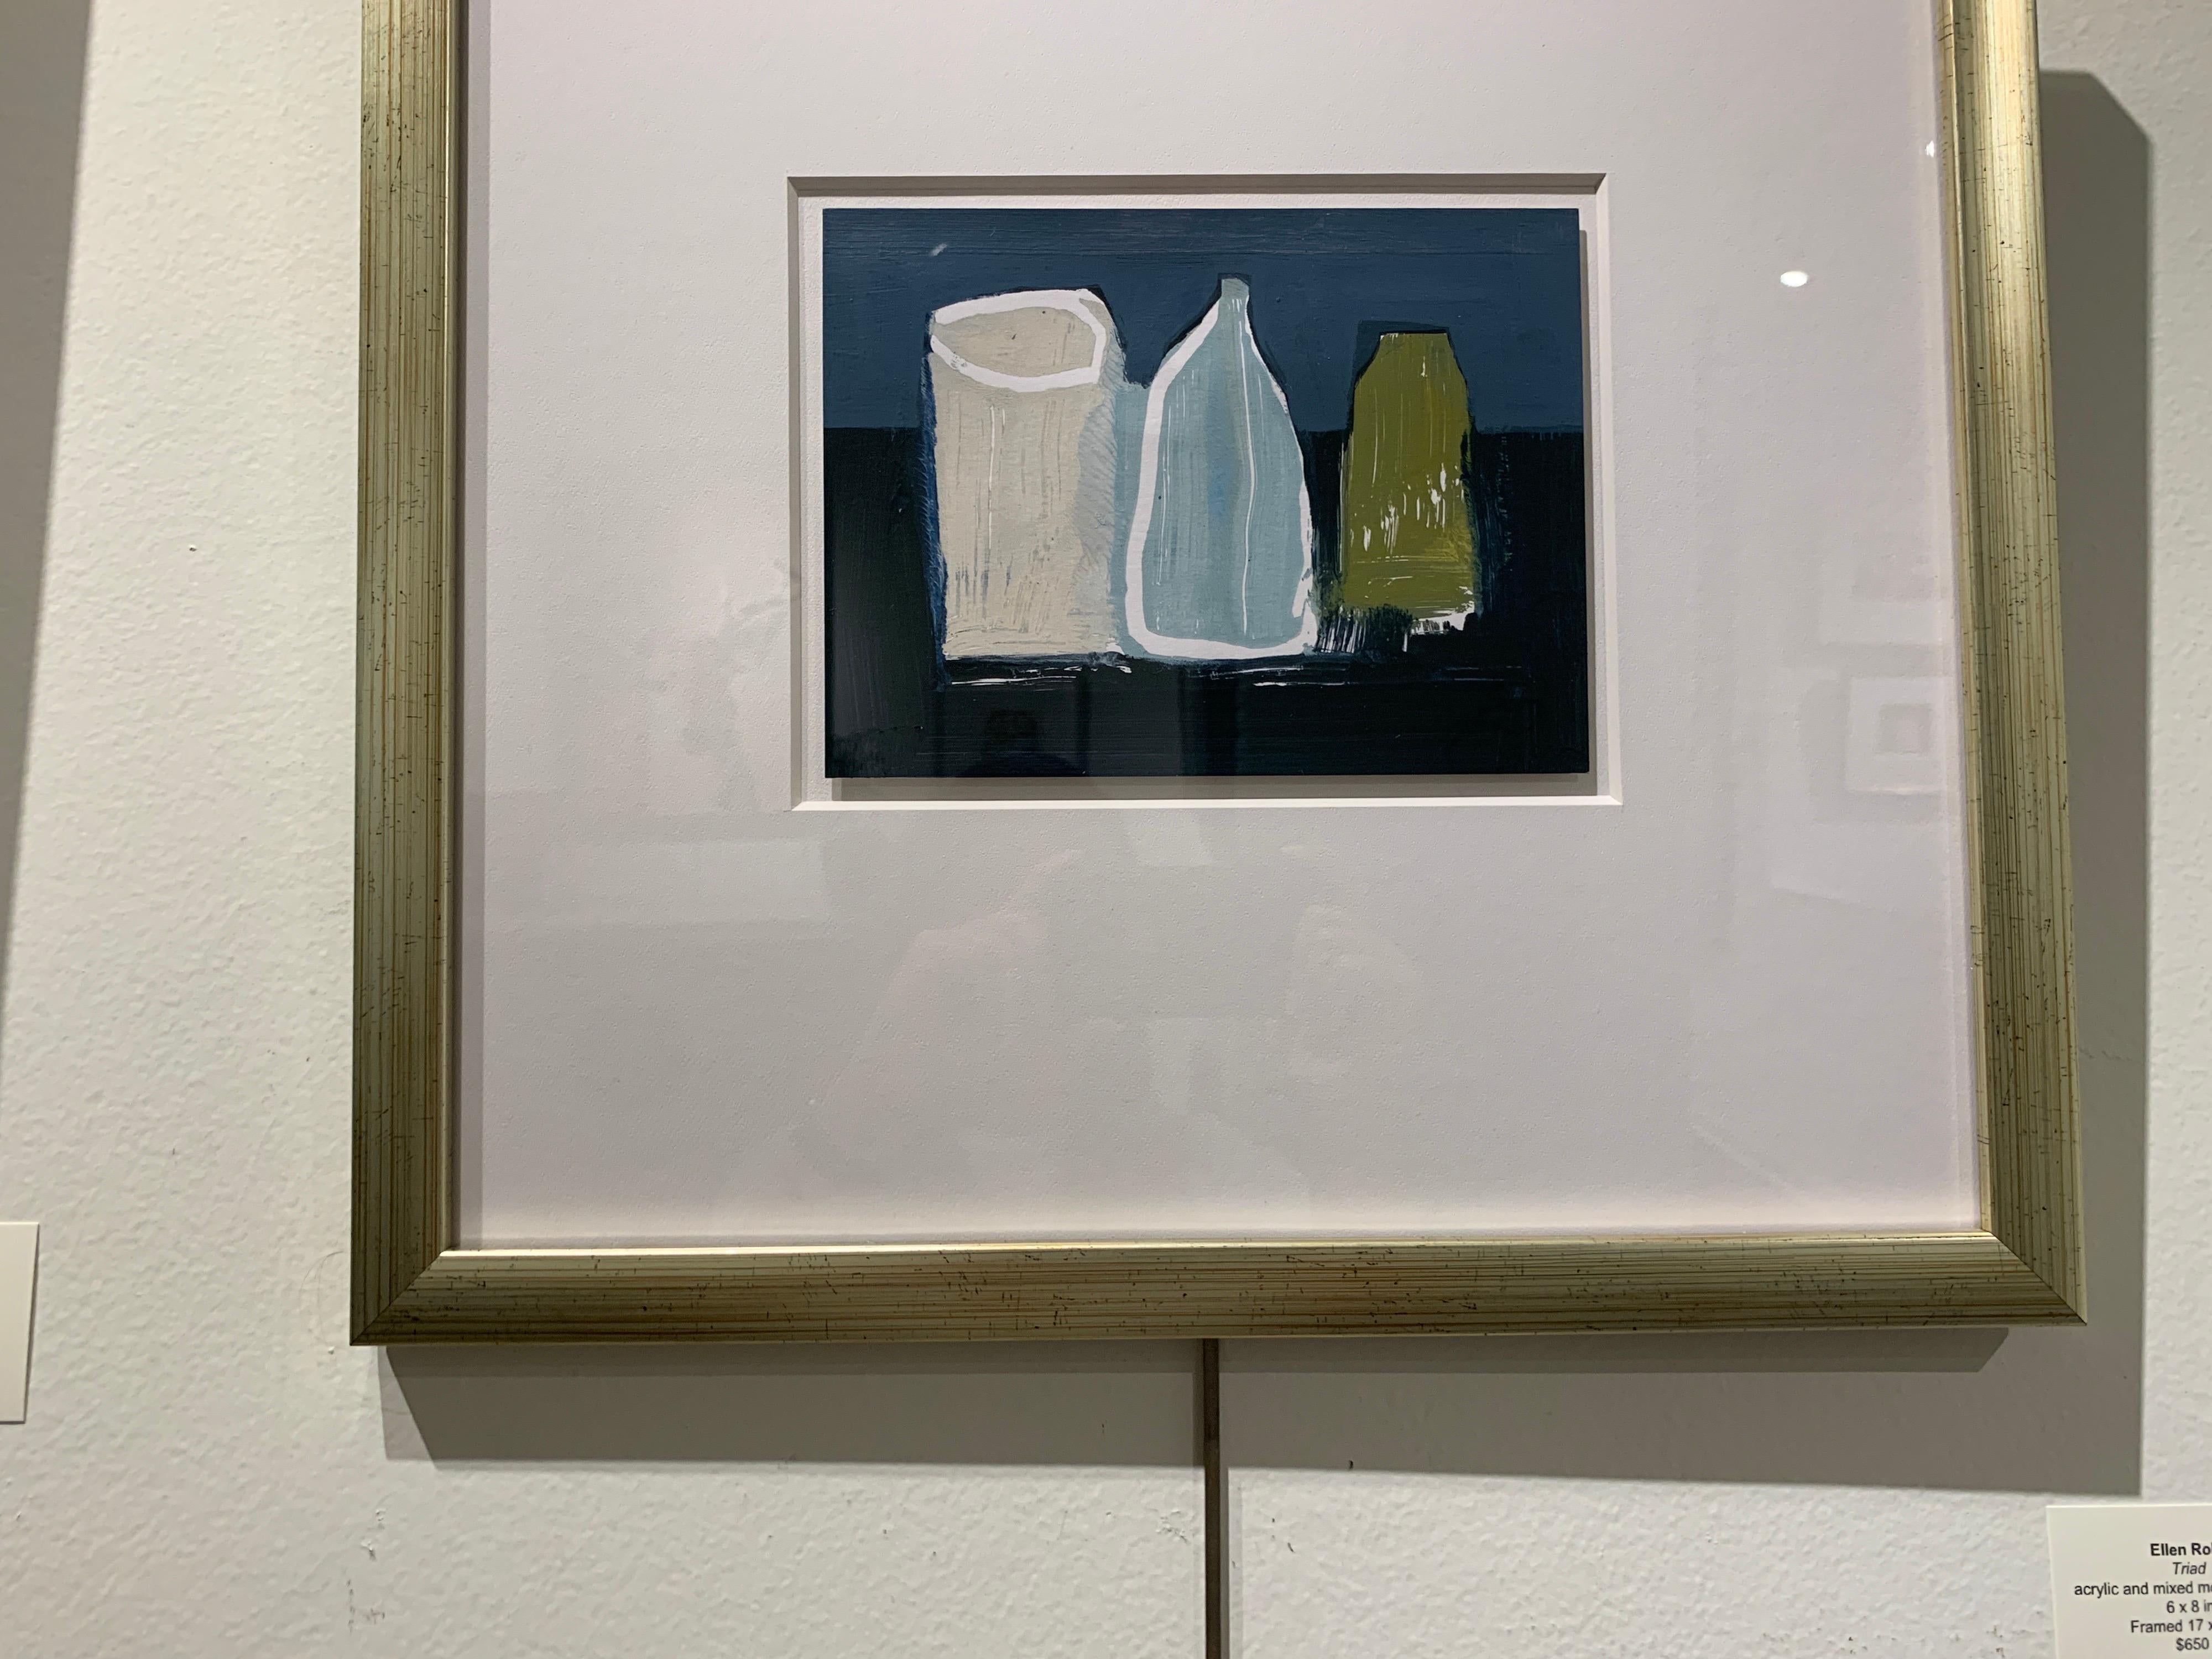 Framed in a contemporary warm silver frame.  Unframed, the artwork is 6 x 8.  The artist has signed on the back.

Ellen earned her degree in Art Education with a minor in Painting at the Massachusetts College of Art in Boston.  In 2009 she completed